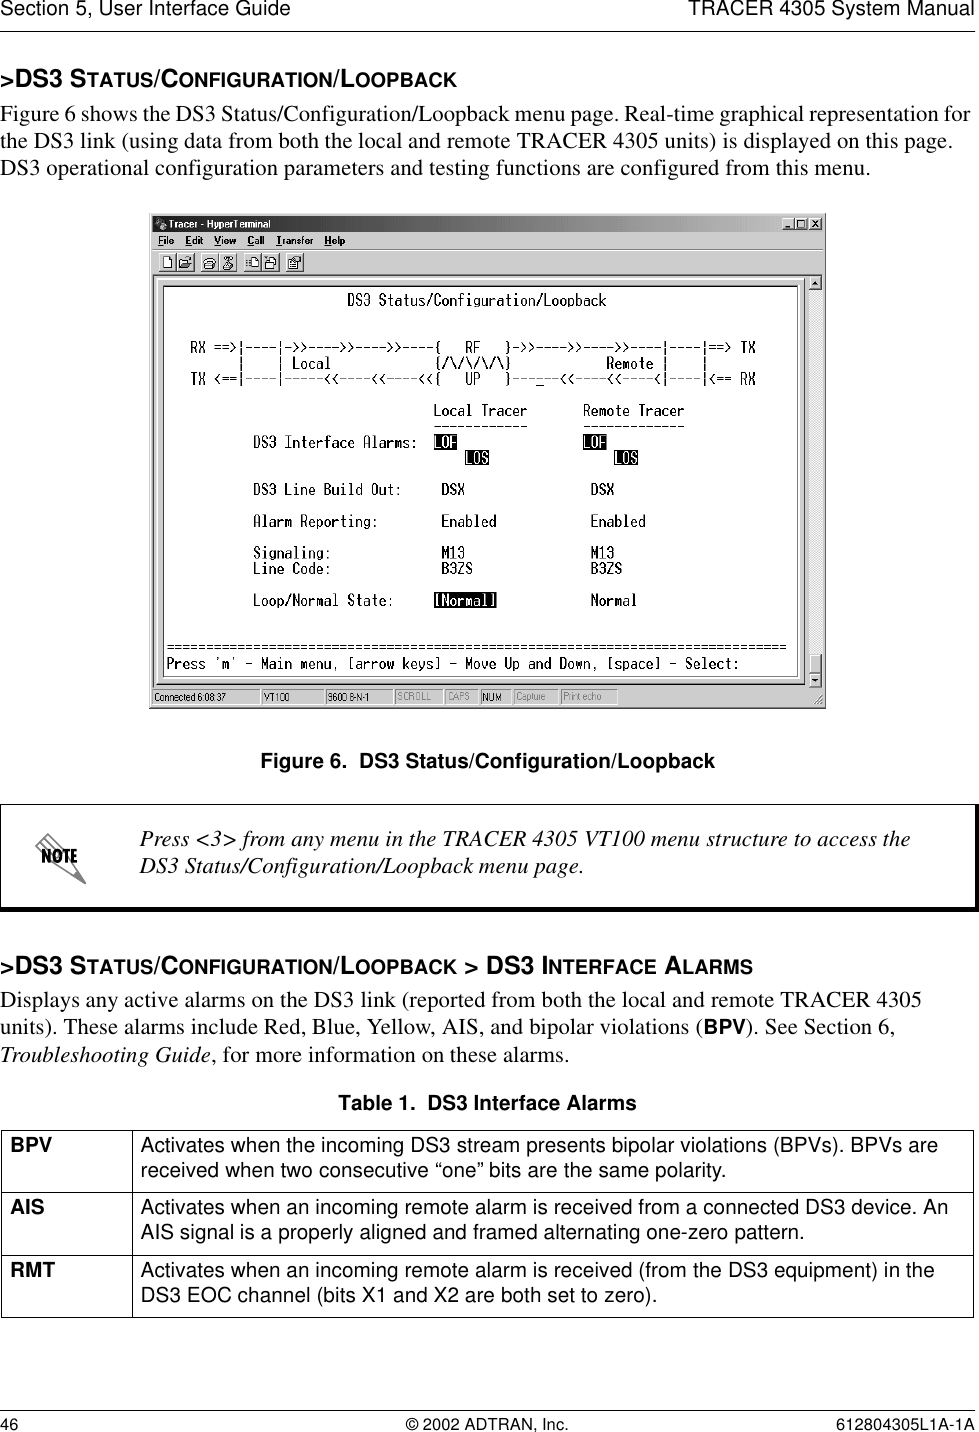 Section 5, User Interface Guide TRACER 4305 System Manual46 © 2002 ADTRAN, Inc. 612804305L1A-1A&gt;DS3 STATUS/CONFIGURATION/LOOPBACKFigure 6 shows the DS3 Status/Configuration/Loopback menu page. Real-time graphical representation for the DS3 link (using data from both the local and remote TRACER 4305 units) is displayed on this page. DS3 operational configuration parameters and testing functions are configured from this menu.Figure 6.  DS3 Status/Configuration/Loopback&gt;DS3 STATUS/CONFIGURATION/LOOPBACK &gt; DS3 INTERFACE ALARMSDisplays any active alarms on the DS3 link (reported from both the local and remote TRACER 4305 units). These alarms include Red, Blue, Yellow, AIS, and bipolar violations (BPV). See Section 6, Troubleshooting Guide, for more information on these alarms.Press &lt;3&gt; from any menu in the TRACER 4305 VT100 menu structure to access the DS3 Status/Configuration/Loopback menu page.Table 1.  DS3 Interface AlarmsBPV Activates when the incoming DS3 stream presents bipolar violations (BPVs). BPVs are received when two consecutive “one” bits are the same polarity.AIS Activates when an incoming remote alarm is received from a connected DS3 device. An AIS signal is a properly aligned and framed alternating one-zero pattern.RMT Activates when an incoming remote alarm is received (from the DS3 equipment) in the DS3 EOC channel (bits X1 and X2 are both set to zero).